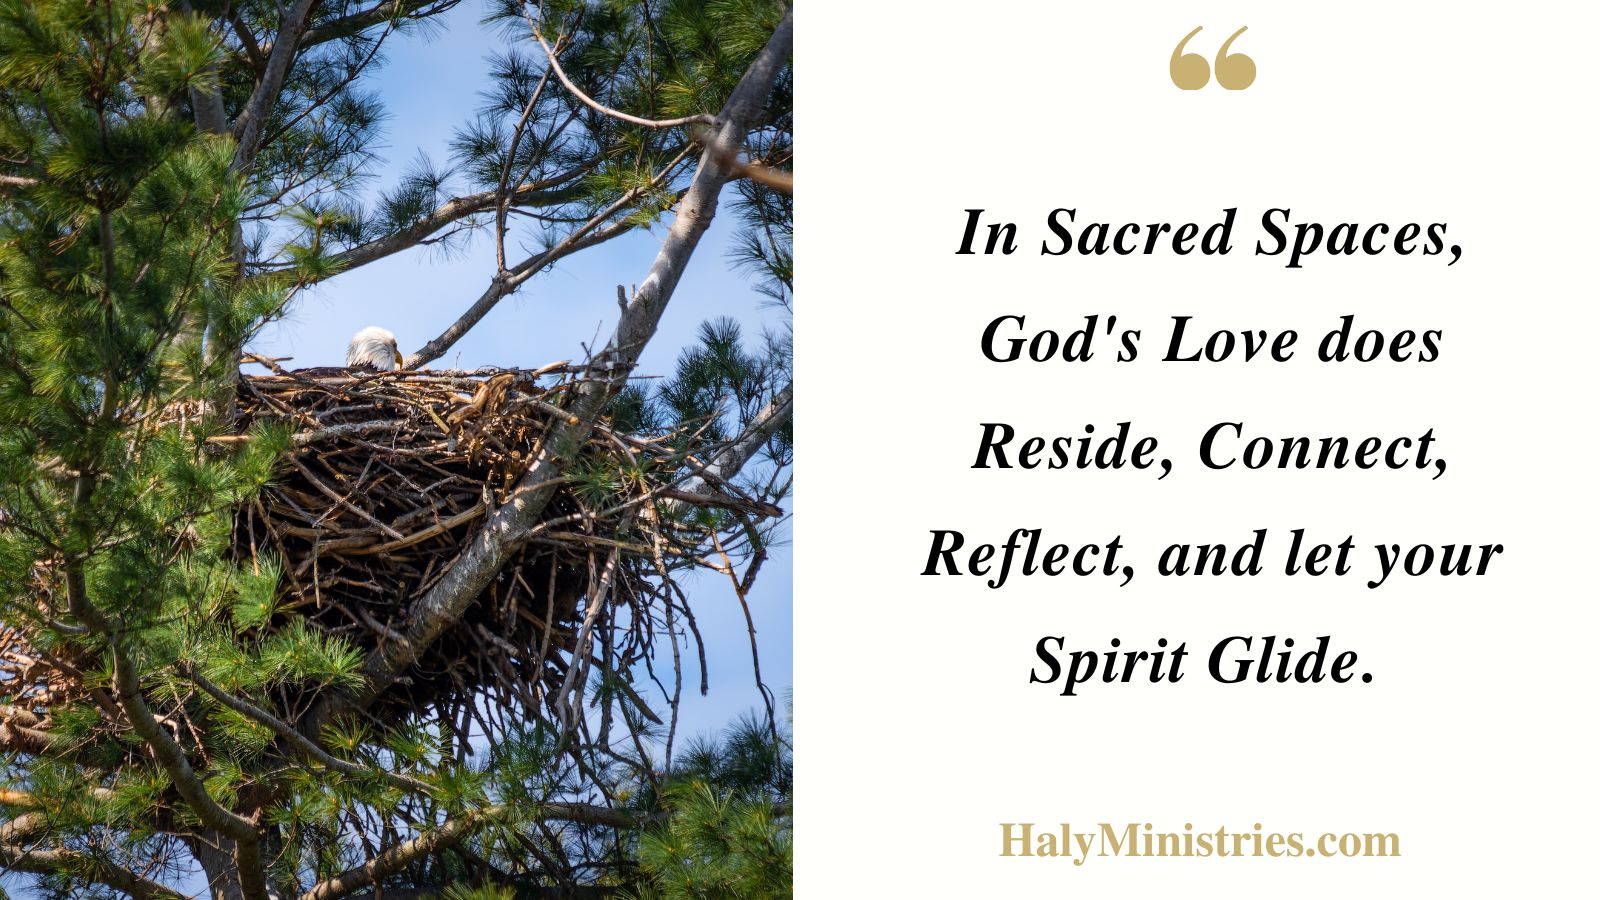 In Sacred Spaces, God's Love does Reside, Connect, Reflect, and let your Spirit Glide. - Haly Ministries Quote 